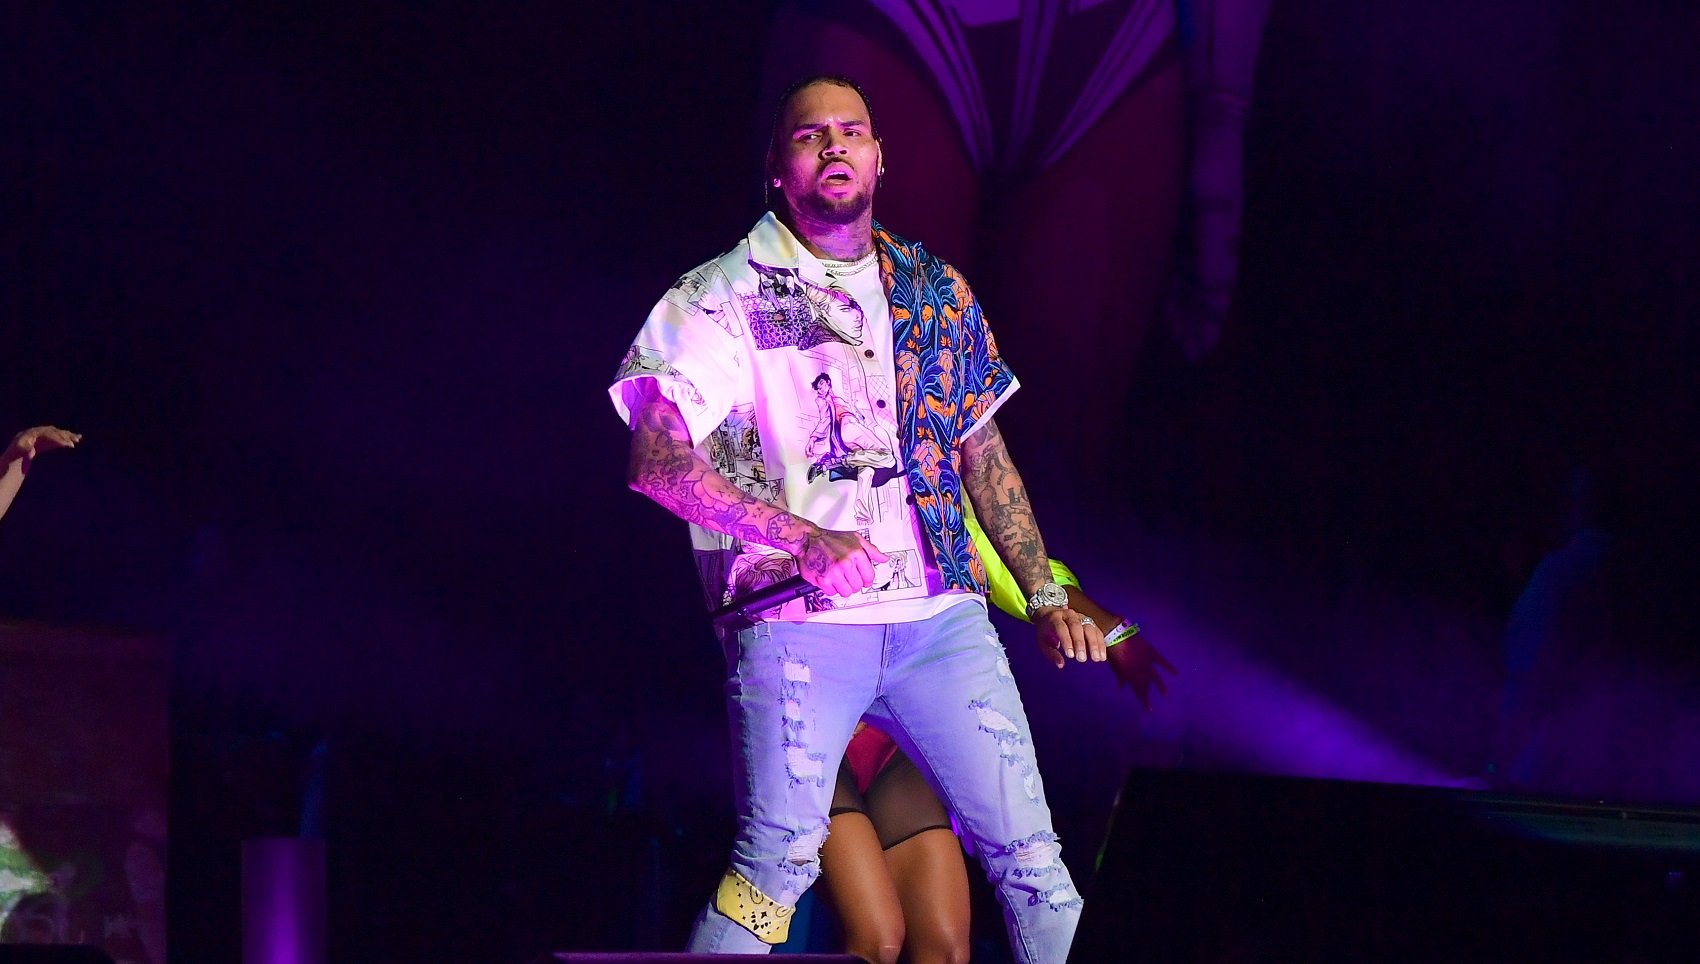 Chris Brown onstage in a multicolored shirt and a pair of skinny blue jeans